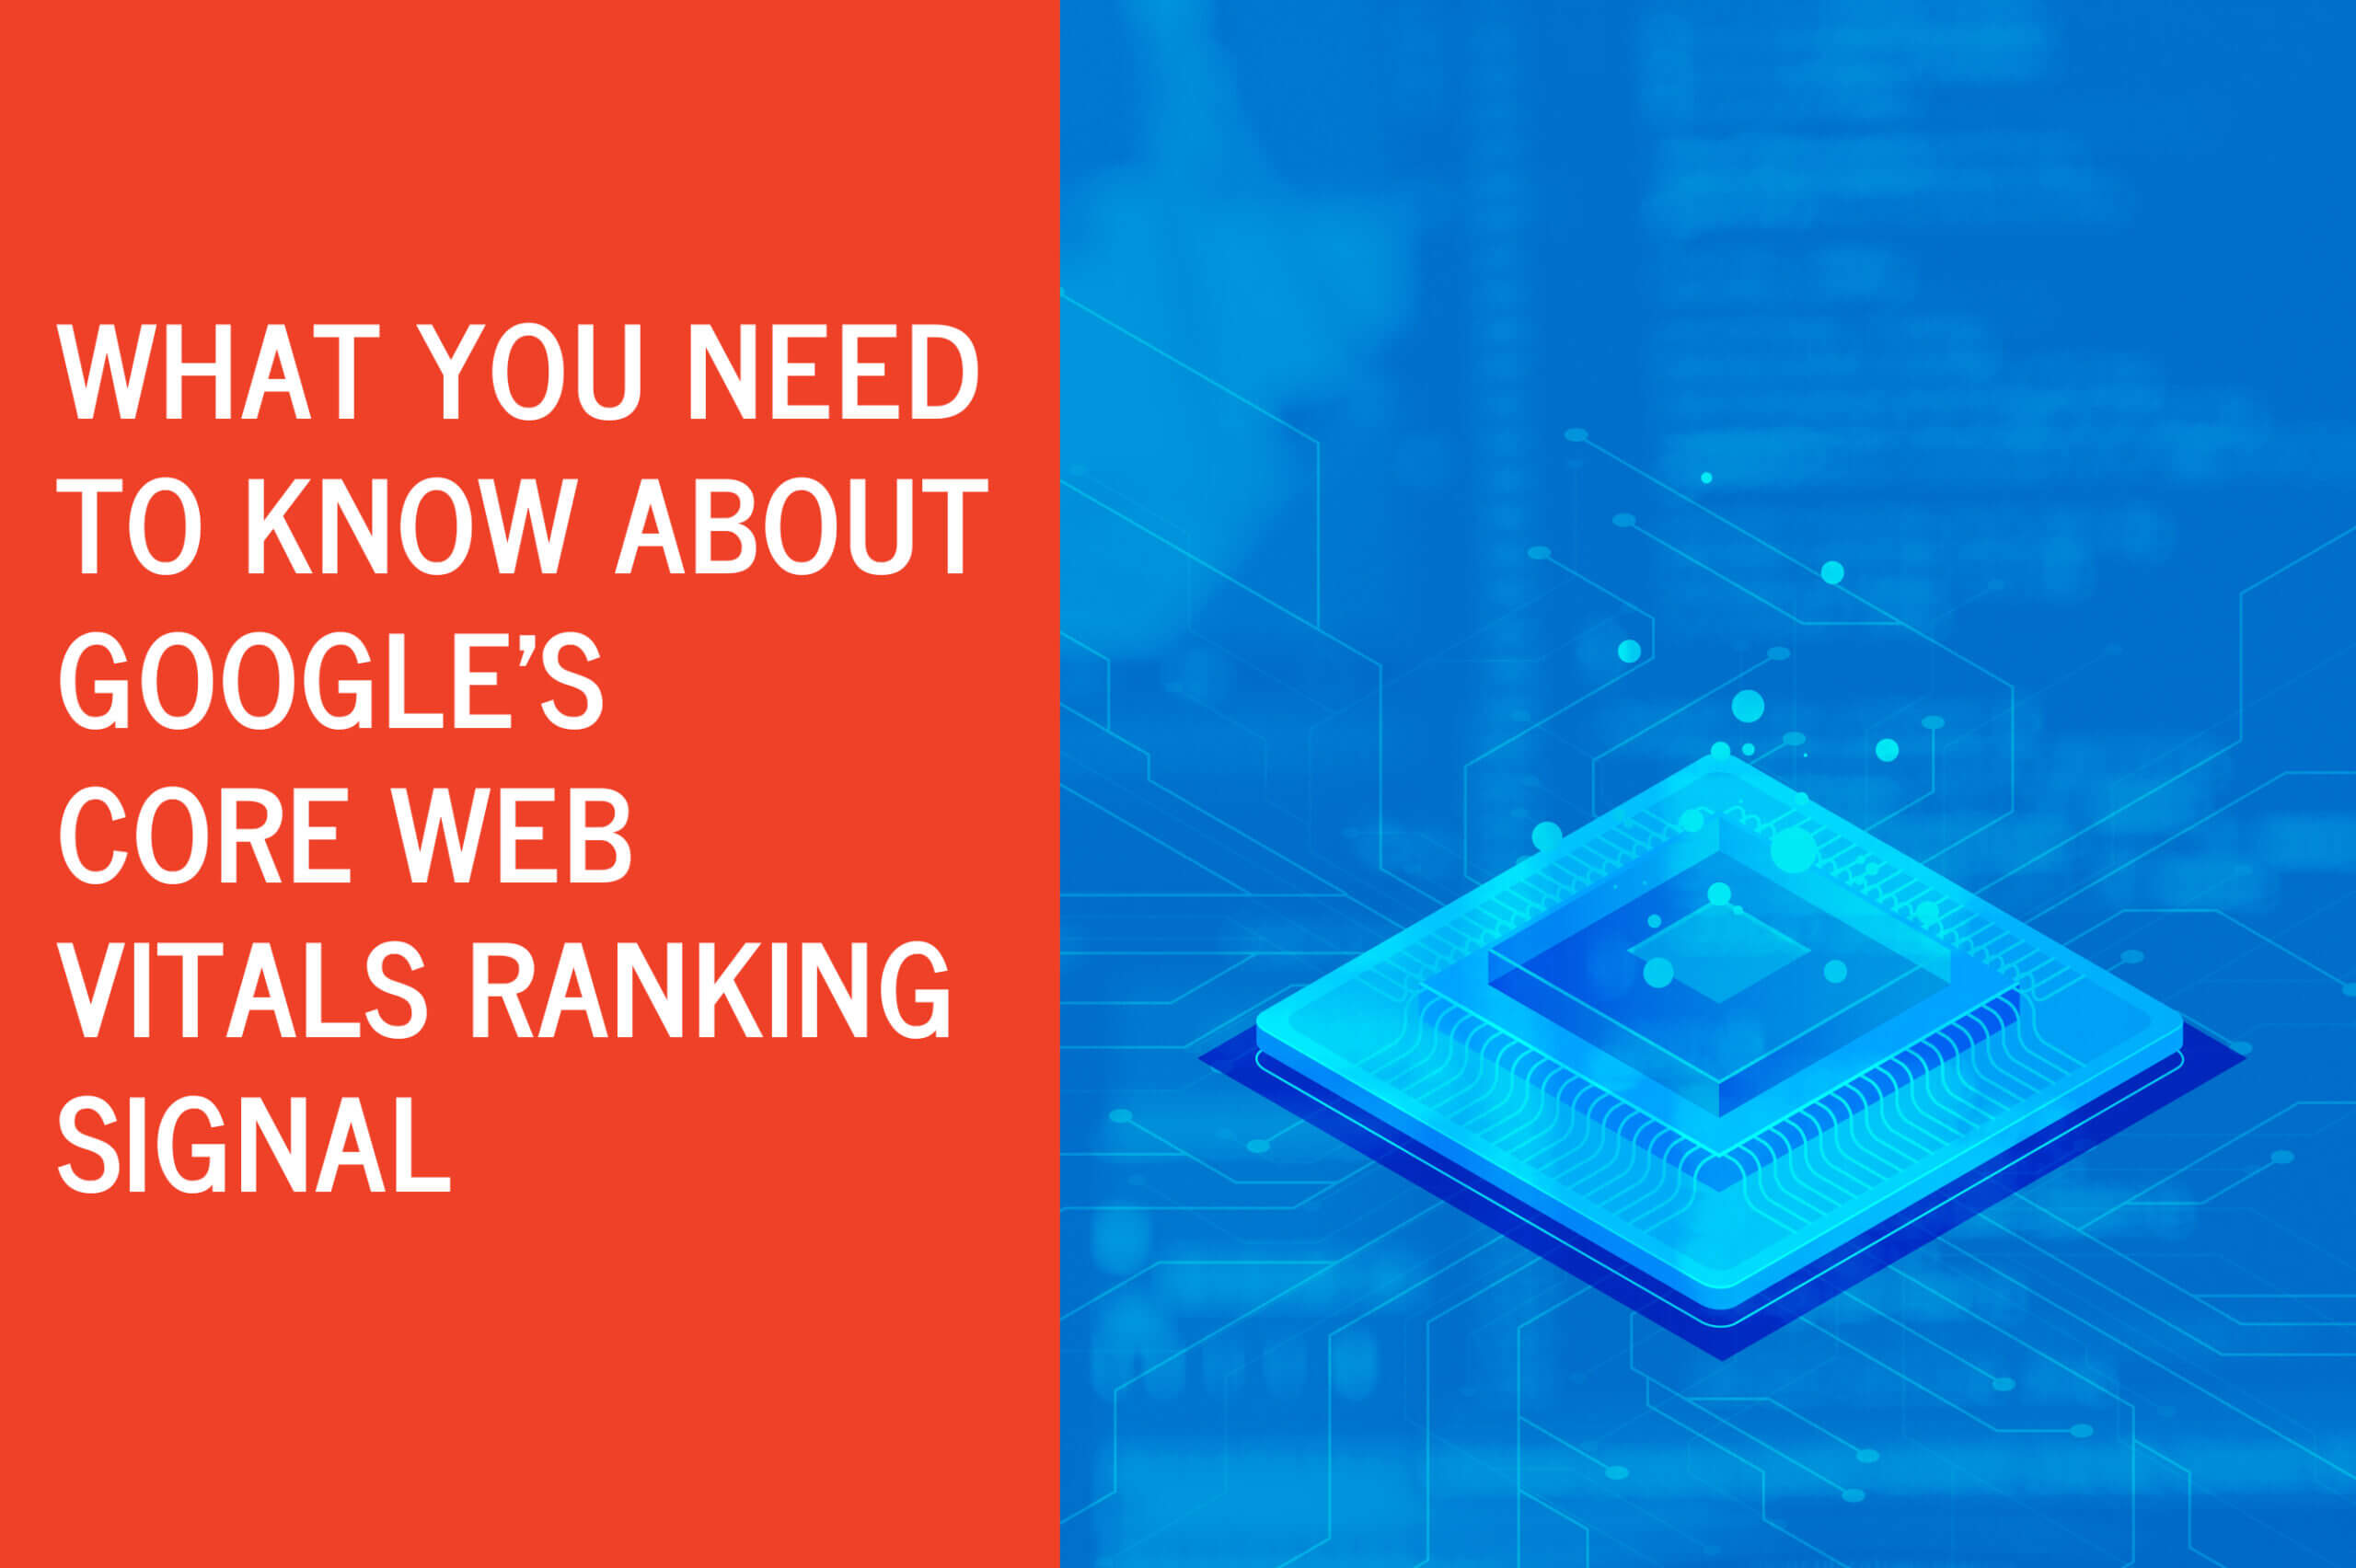 What You Need to Know About Google's Core Web Vitals Ranking Signal